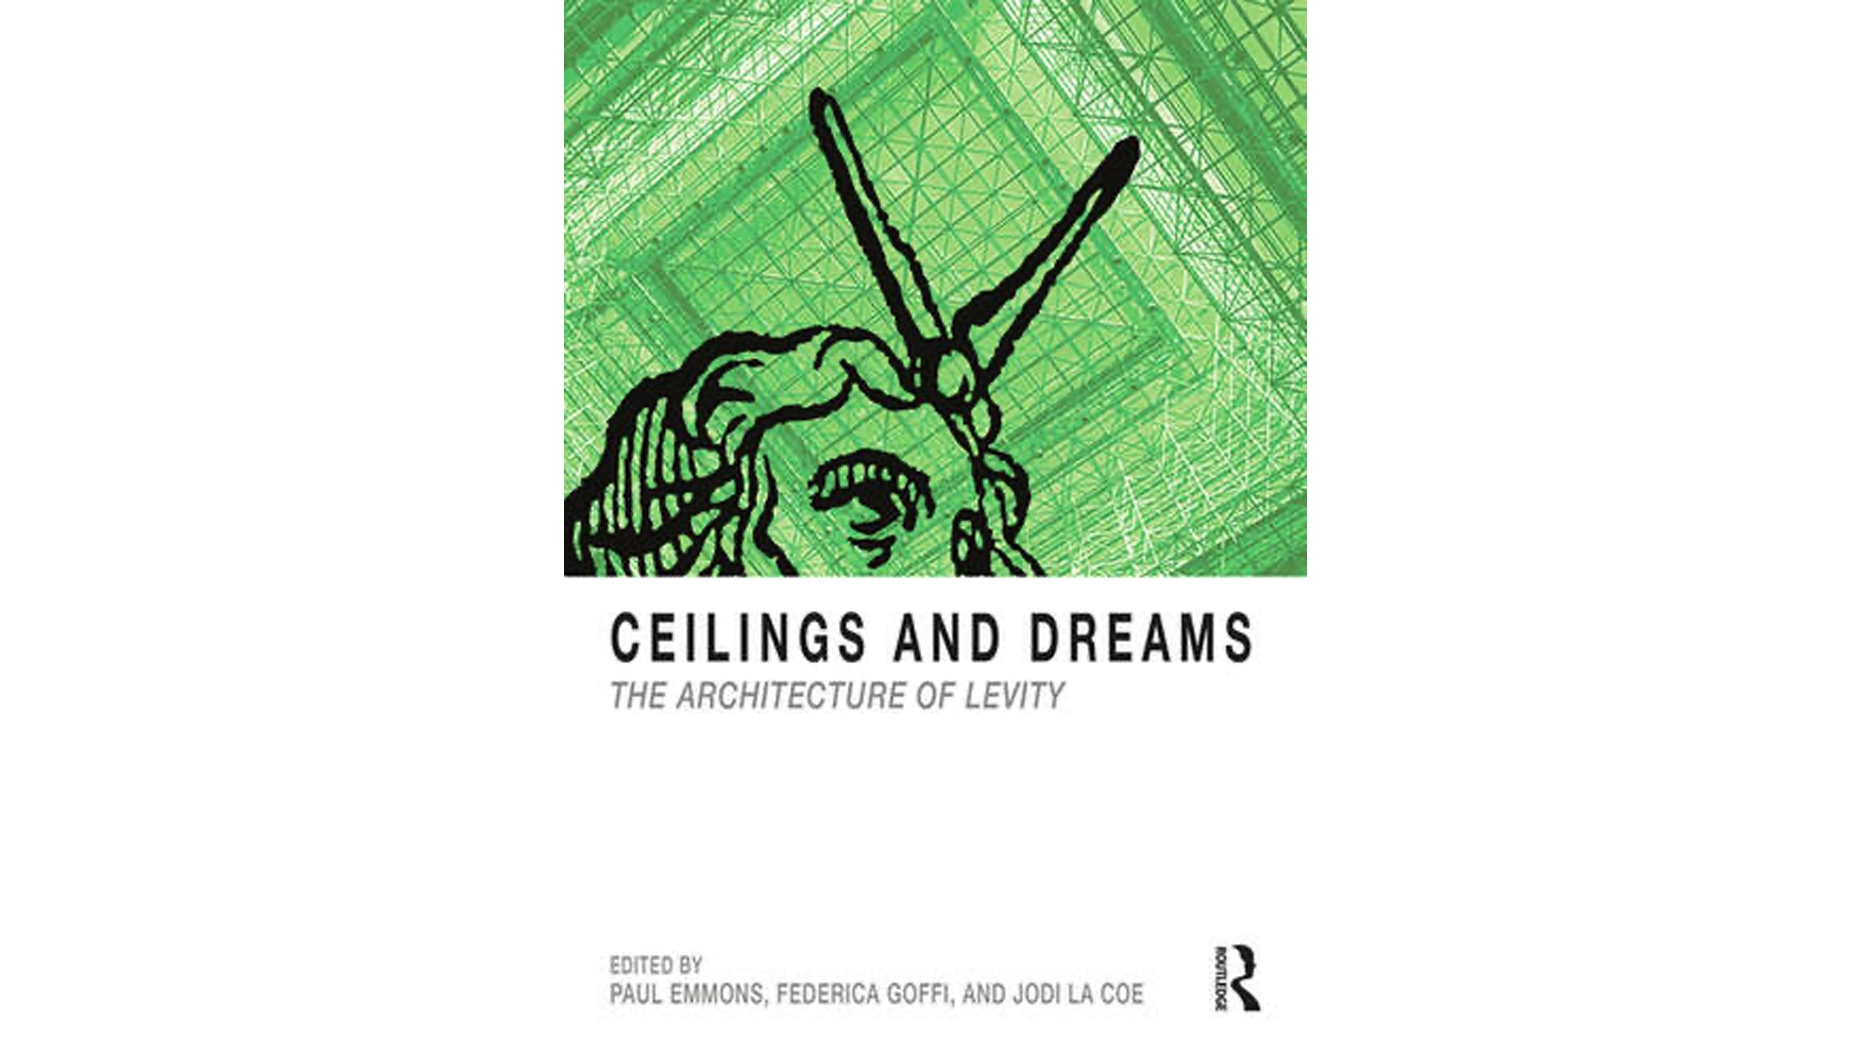 Book Cover of Ceilings and Dreams: The Architecture of Levity